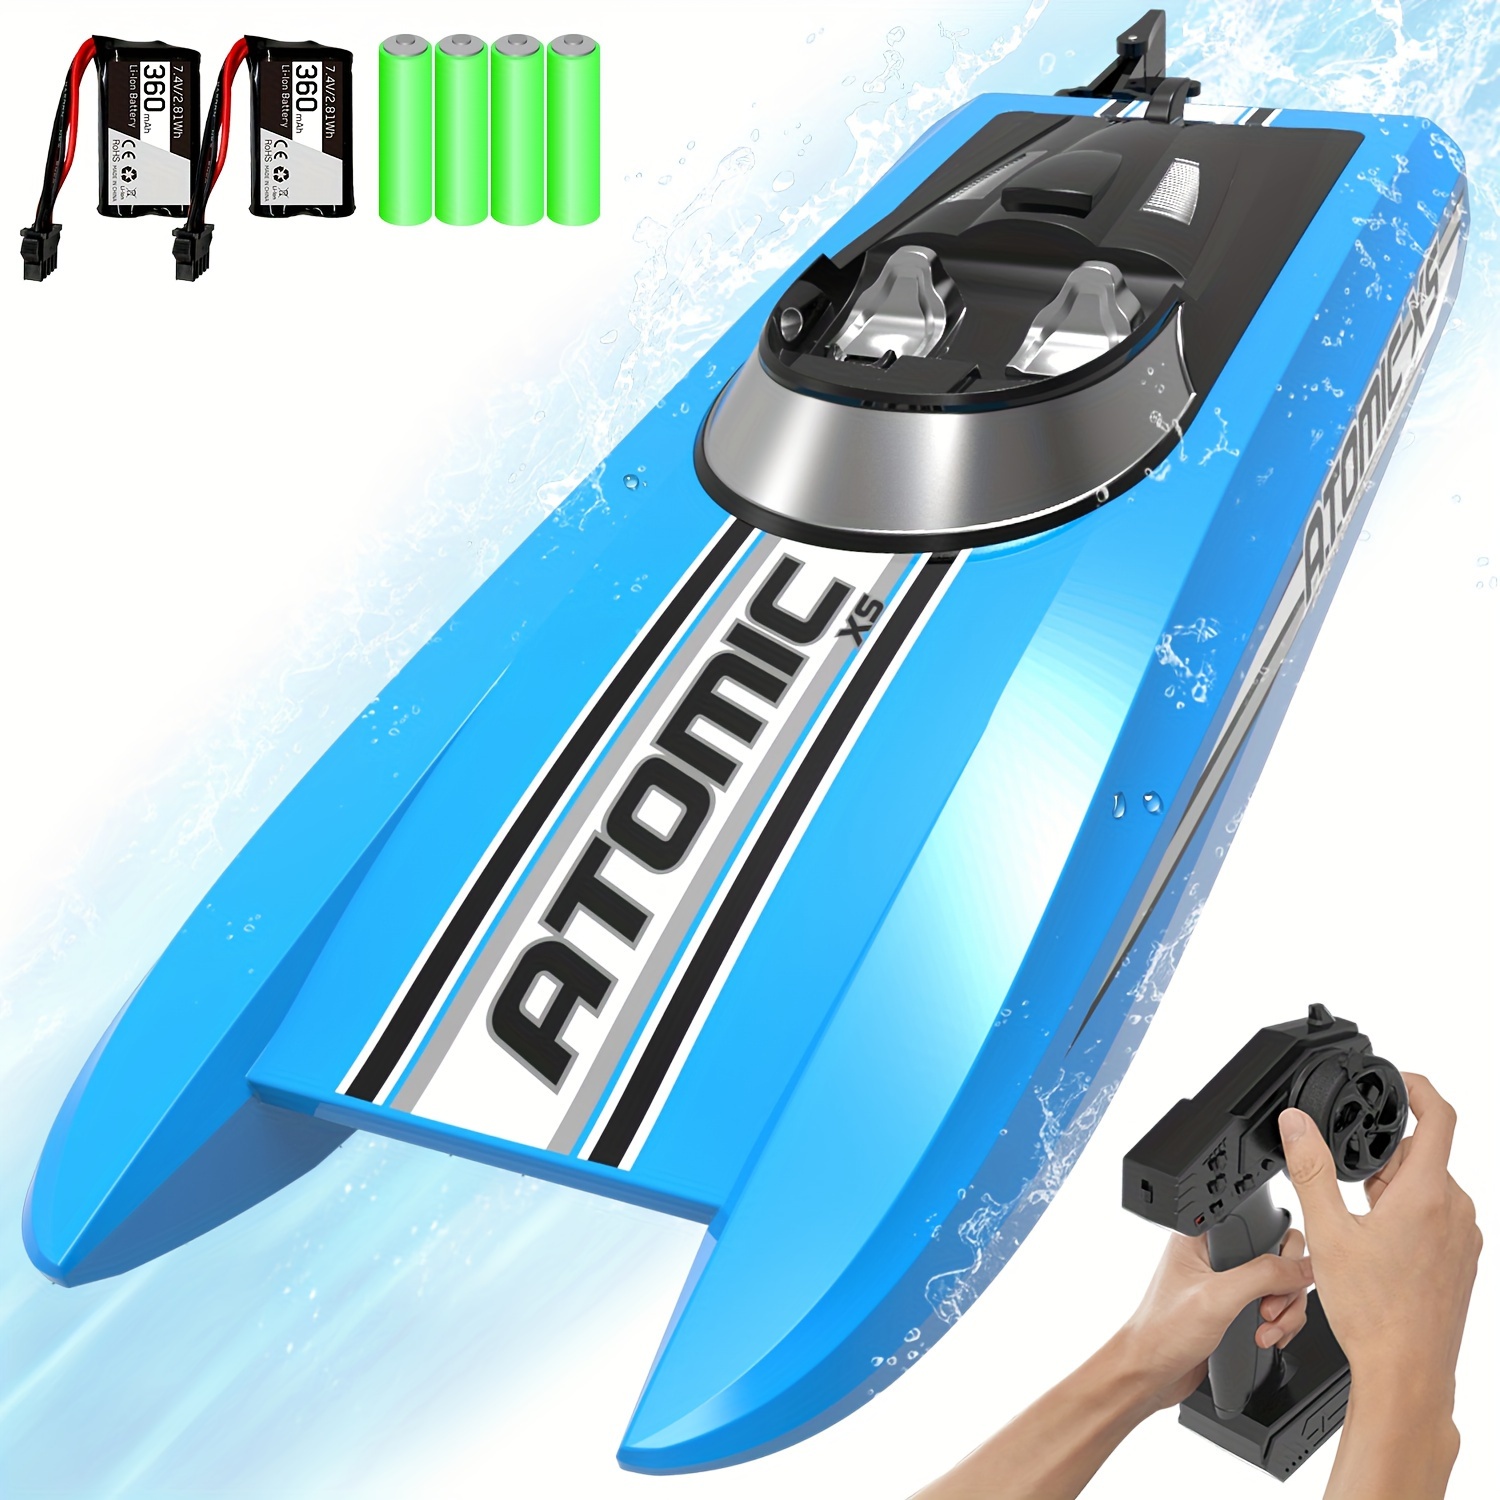 

Volantexrc Remote Control Boats For Pools And Lakes 20+mph Atomicxs High Speed Rc Boat For Kids Or Adults Toy Boat Gifts With 2 Batteries & Reverse Function (795-5)